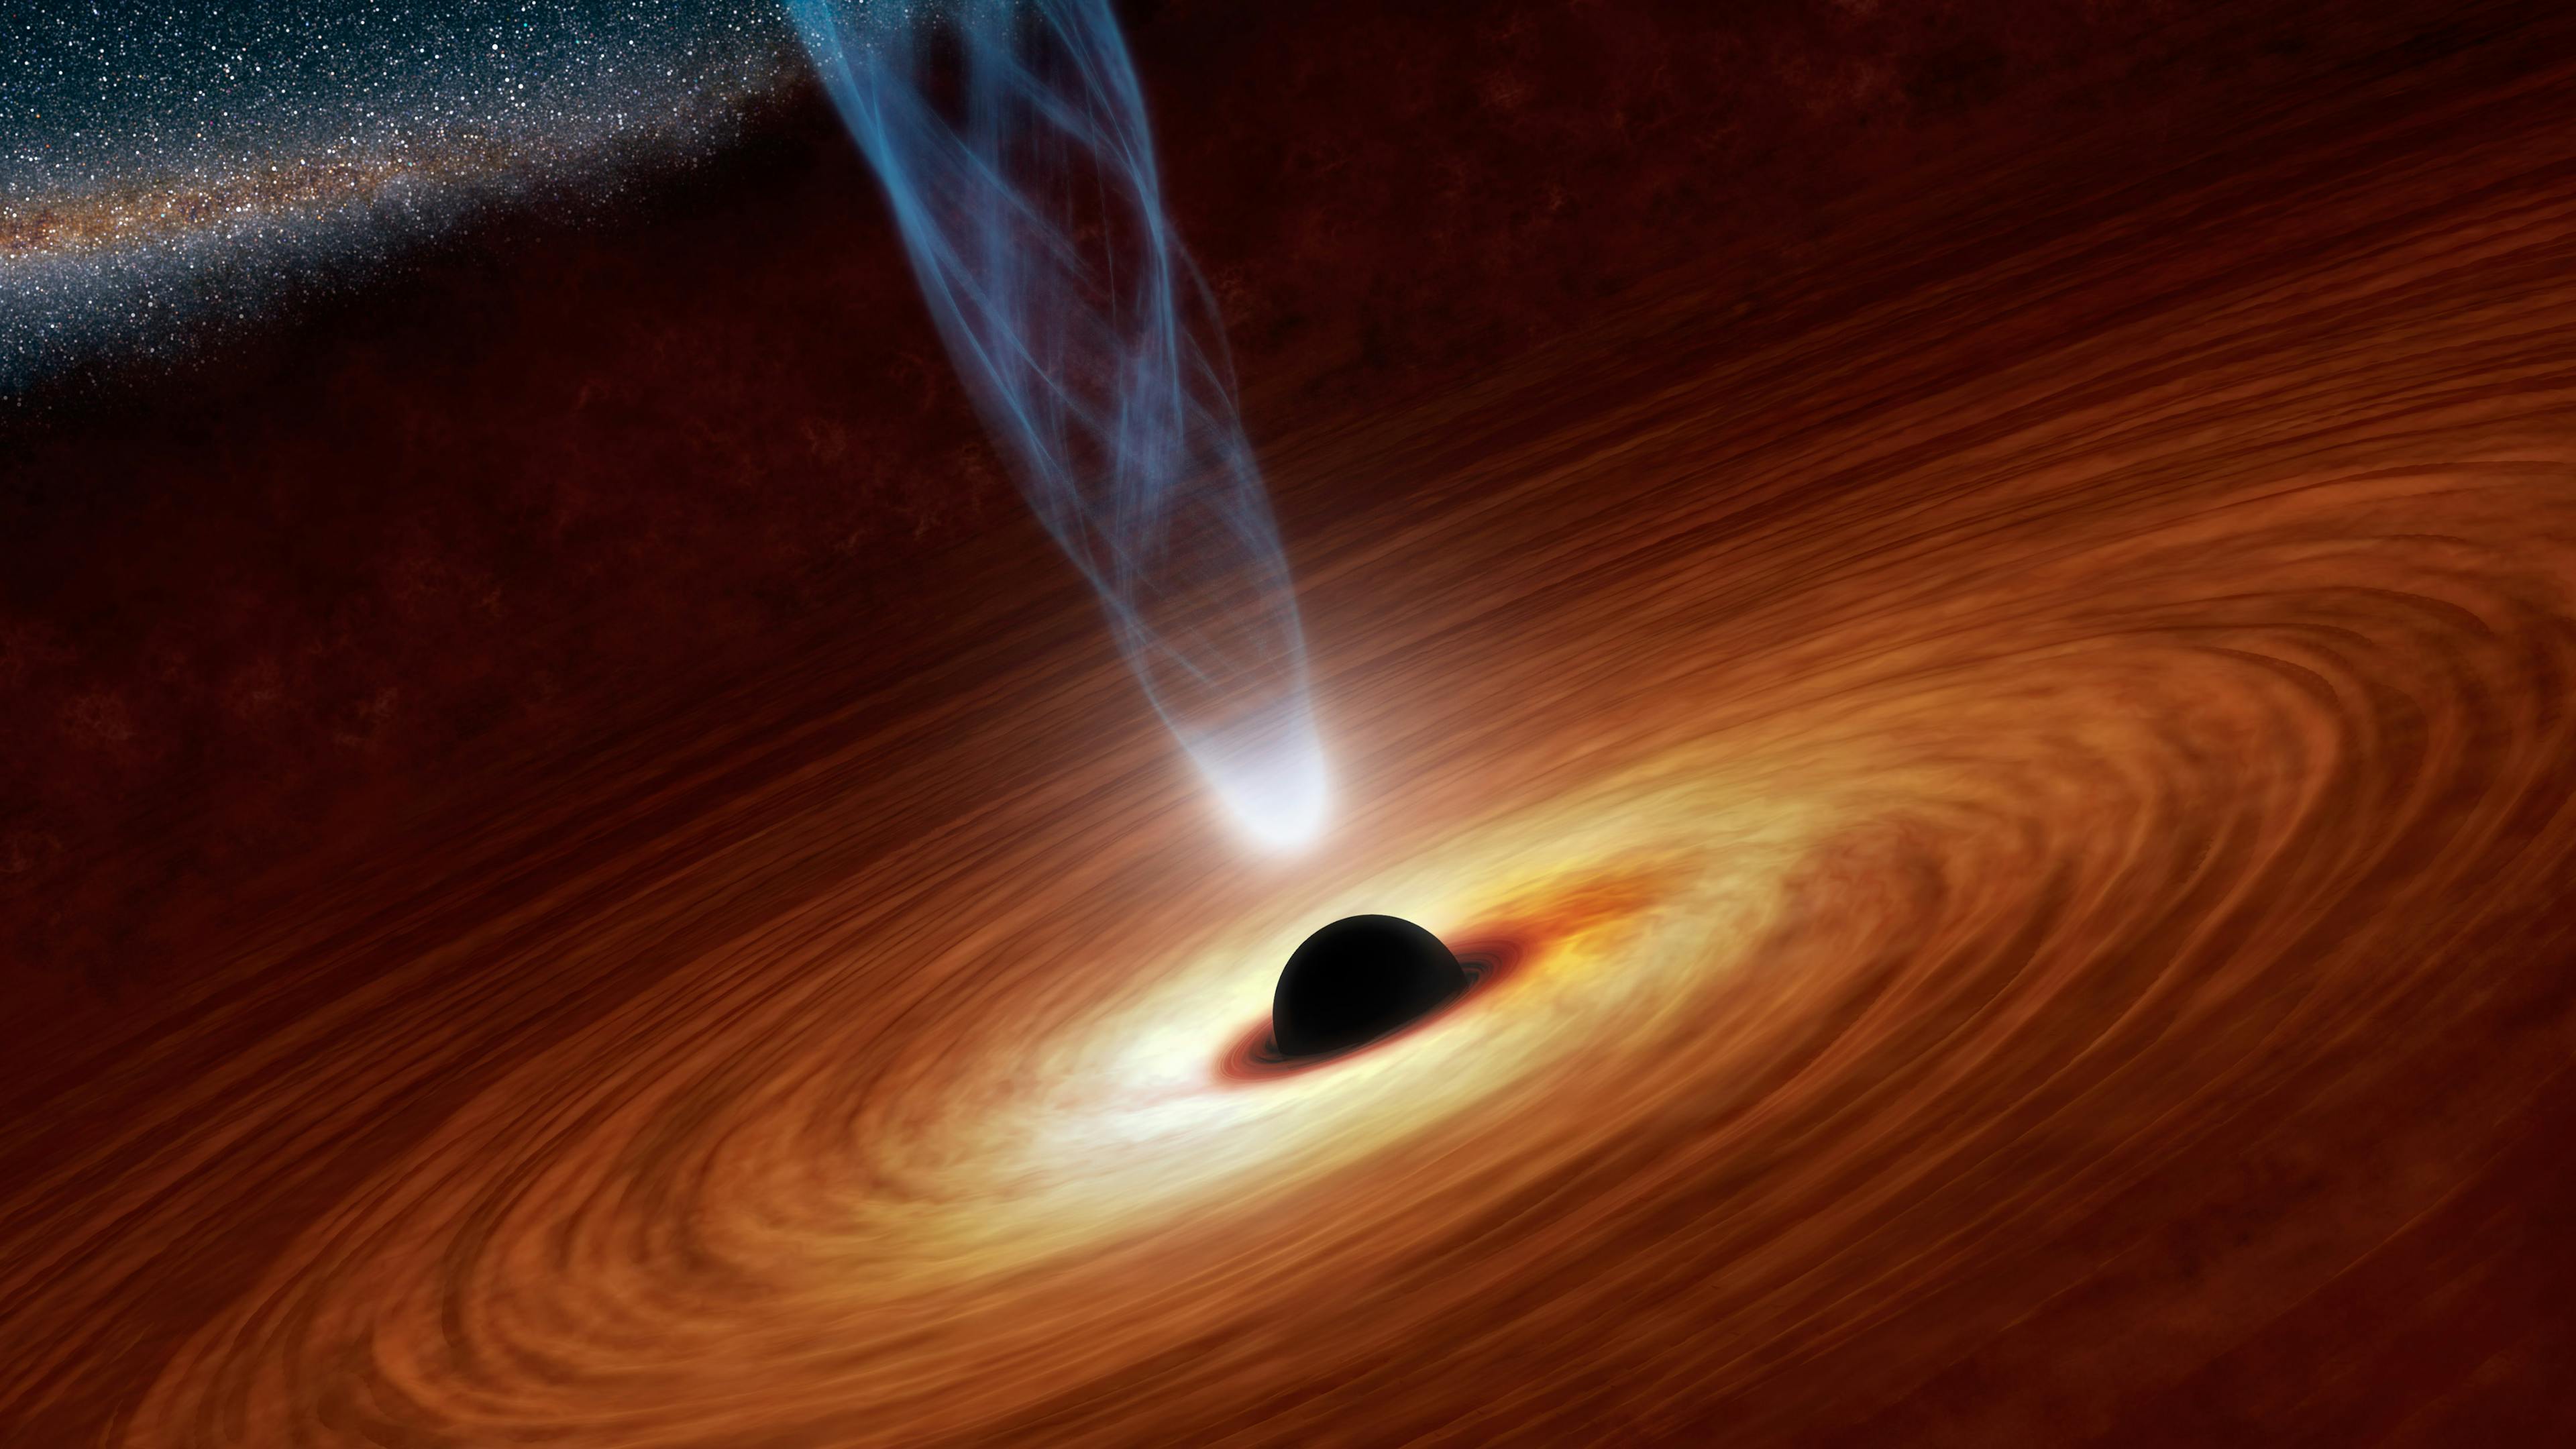 How hot or not is a Black Hole?